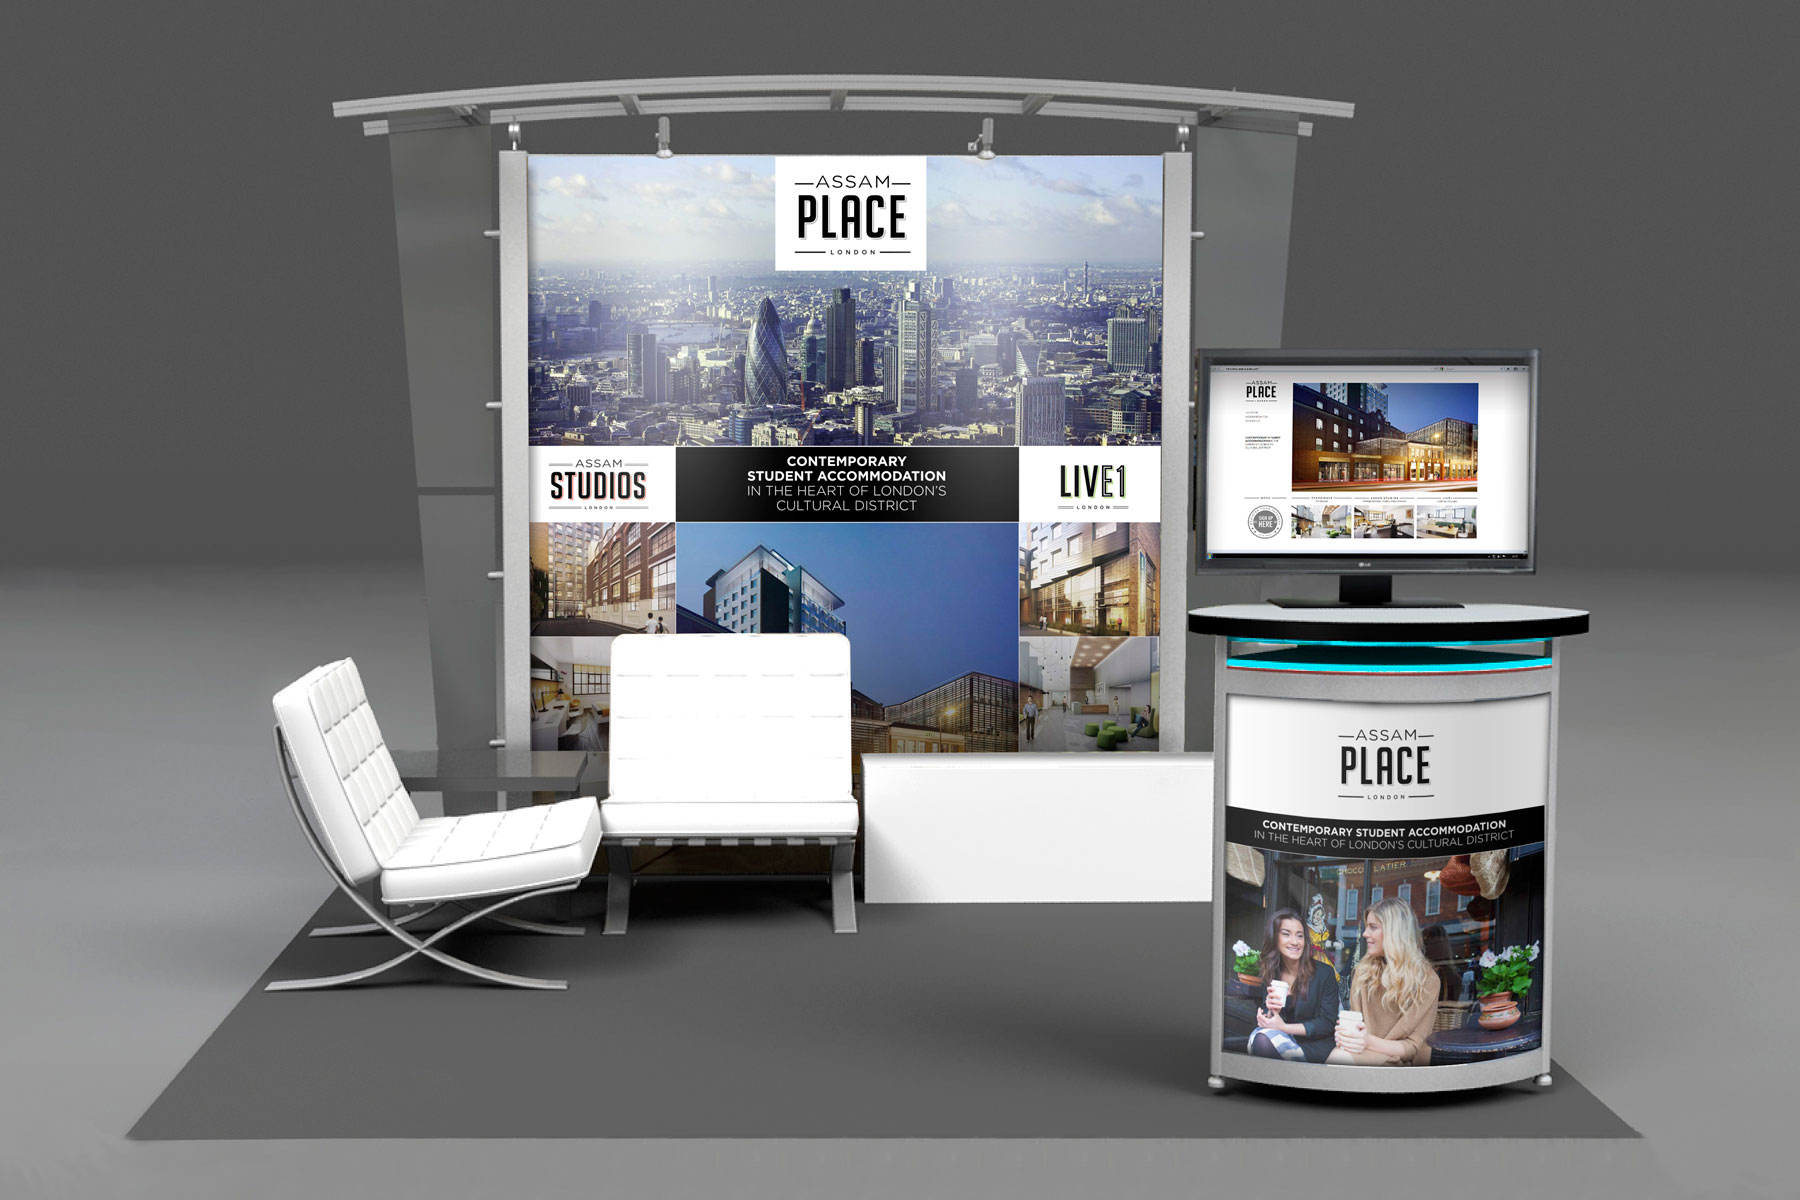 The brand exhibits at a number of shows around the world and we have produced a number of supporting materials.